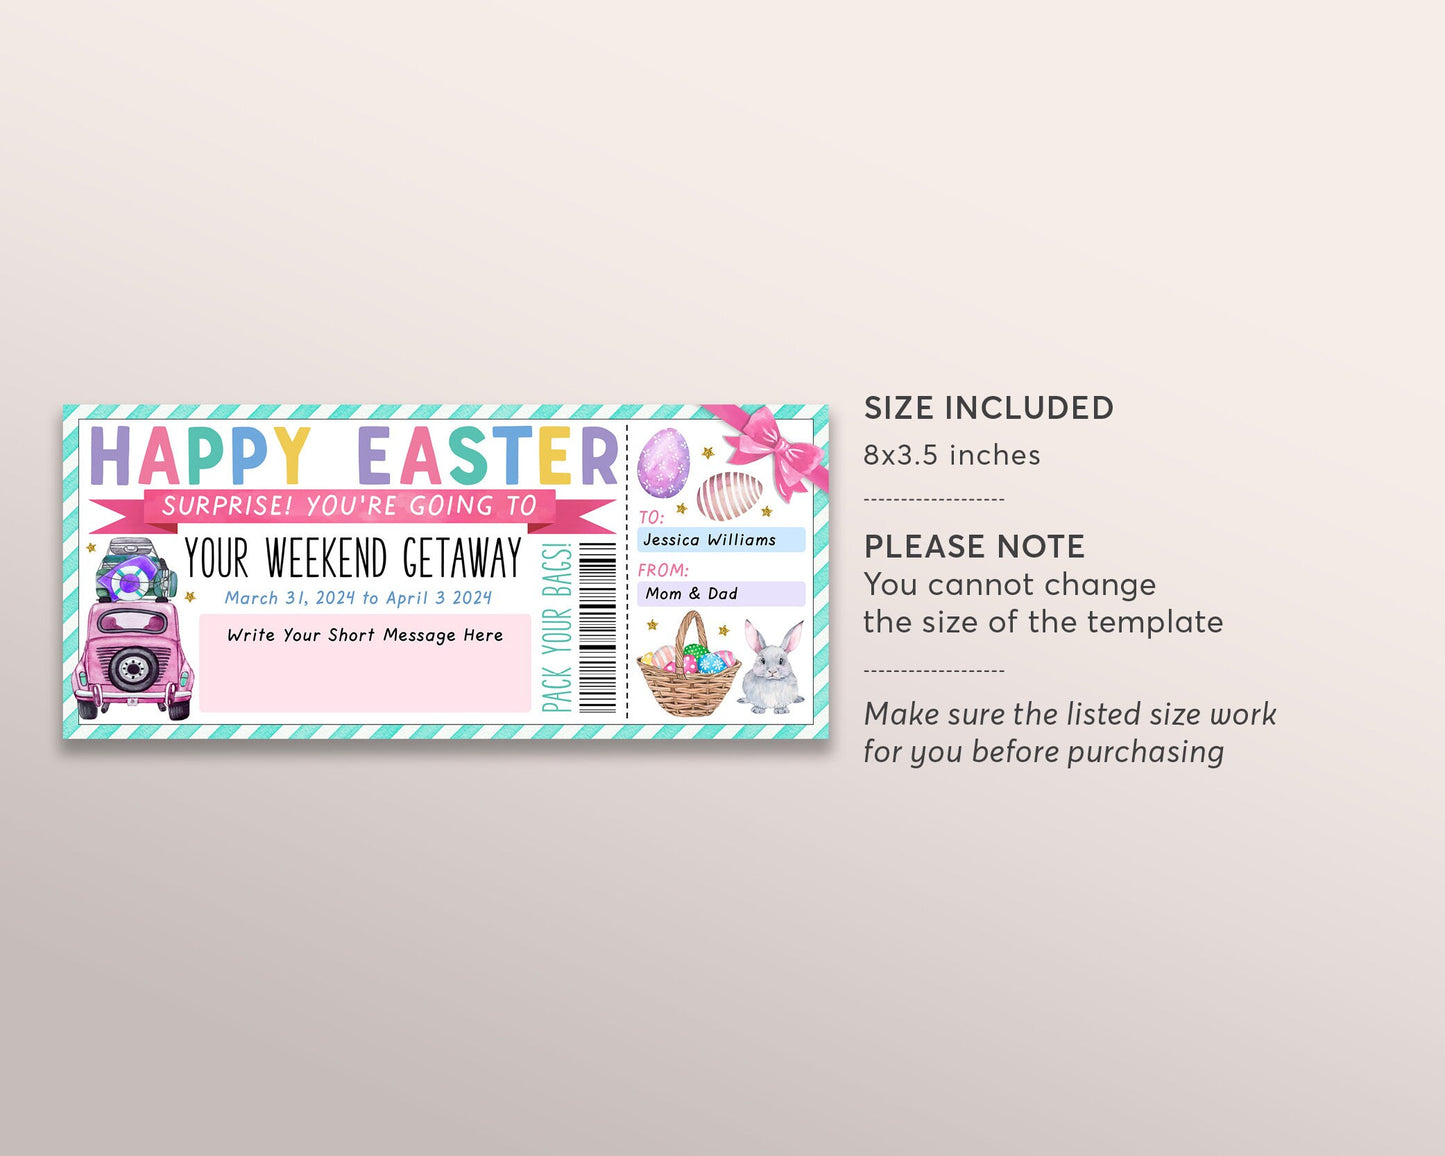 Easter Weekend Getaway Voucher Editable Template, Surprise Easter Vacation Travel Ticket Gift Certificate For Kids Road Trip Staycation